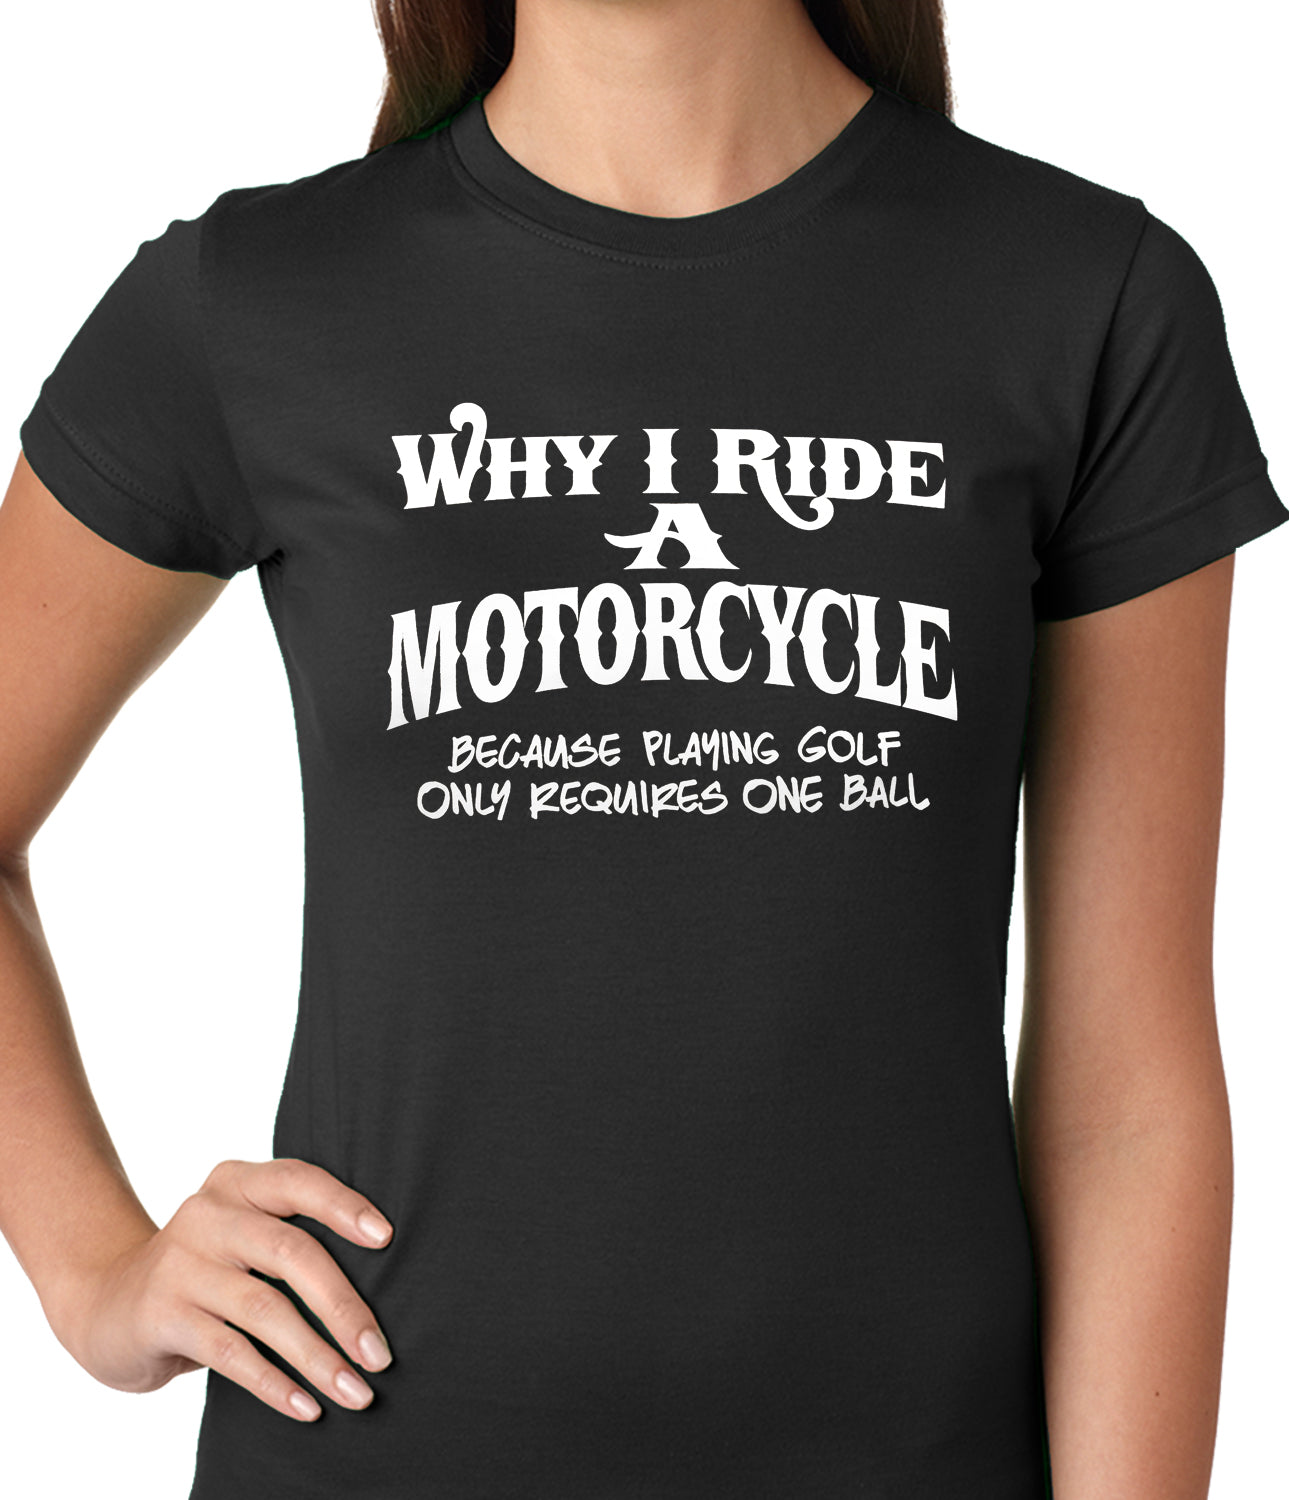 Why I Ride a Motorcycle T-shirt – Bewild